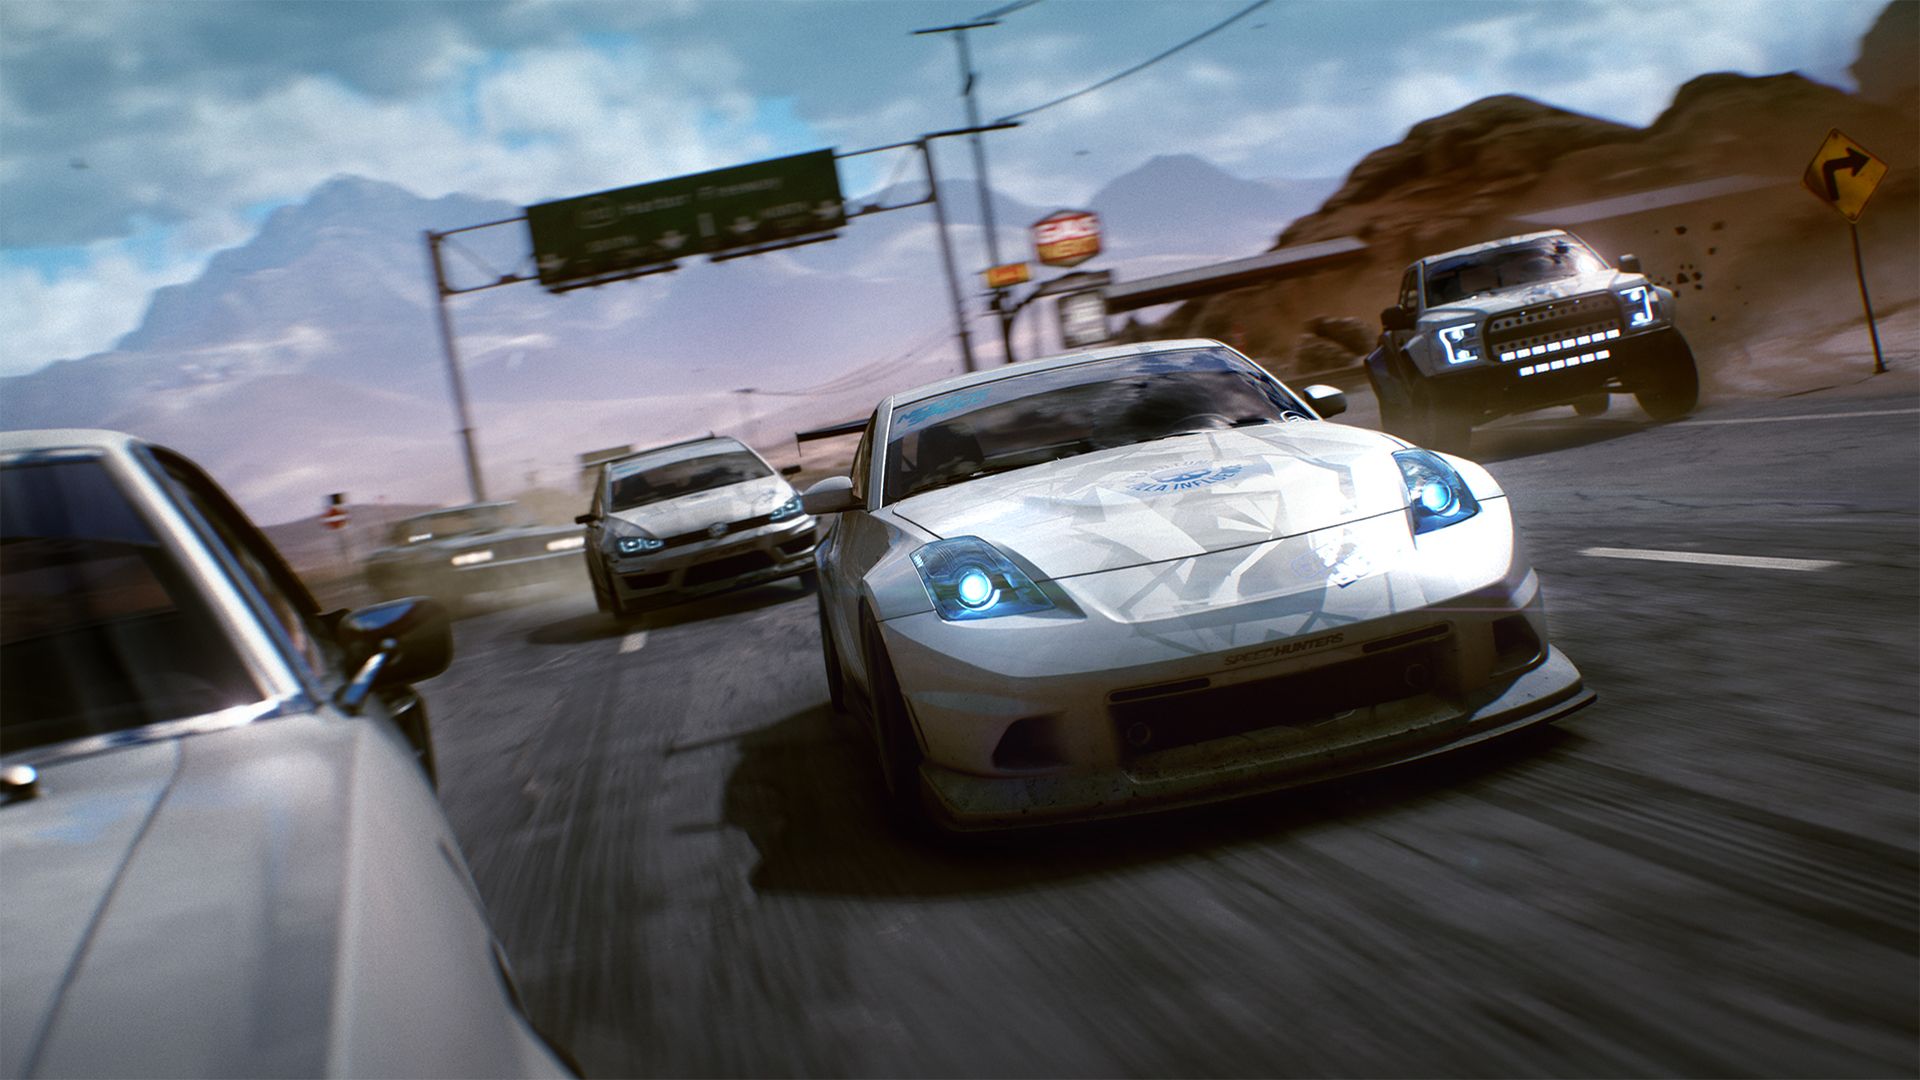 Ʒɳ20Need For Speed:Paybackv1.0޸